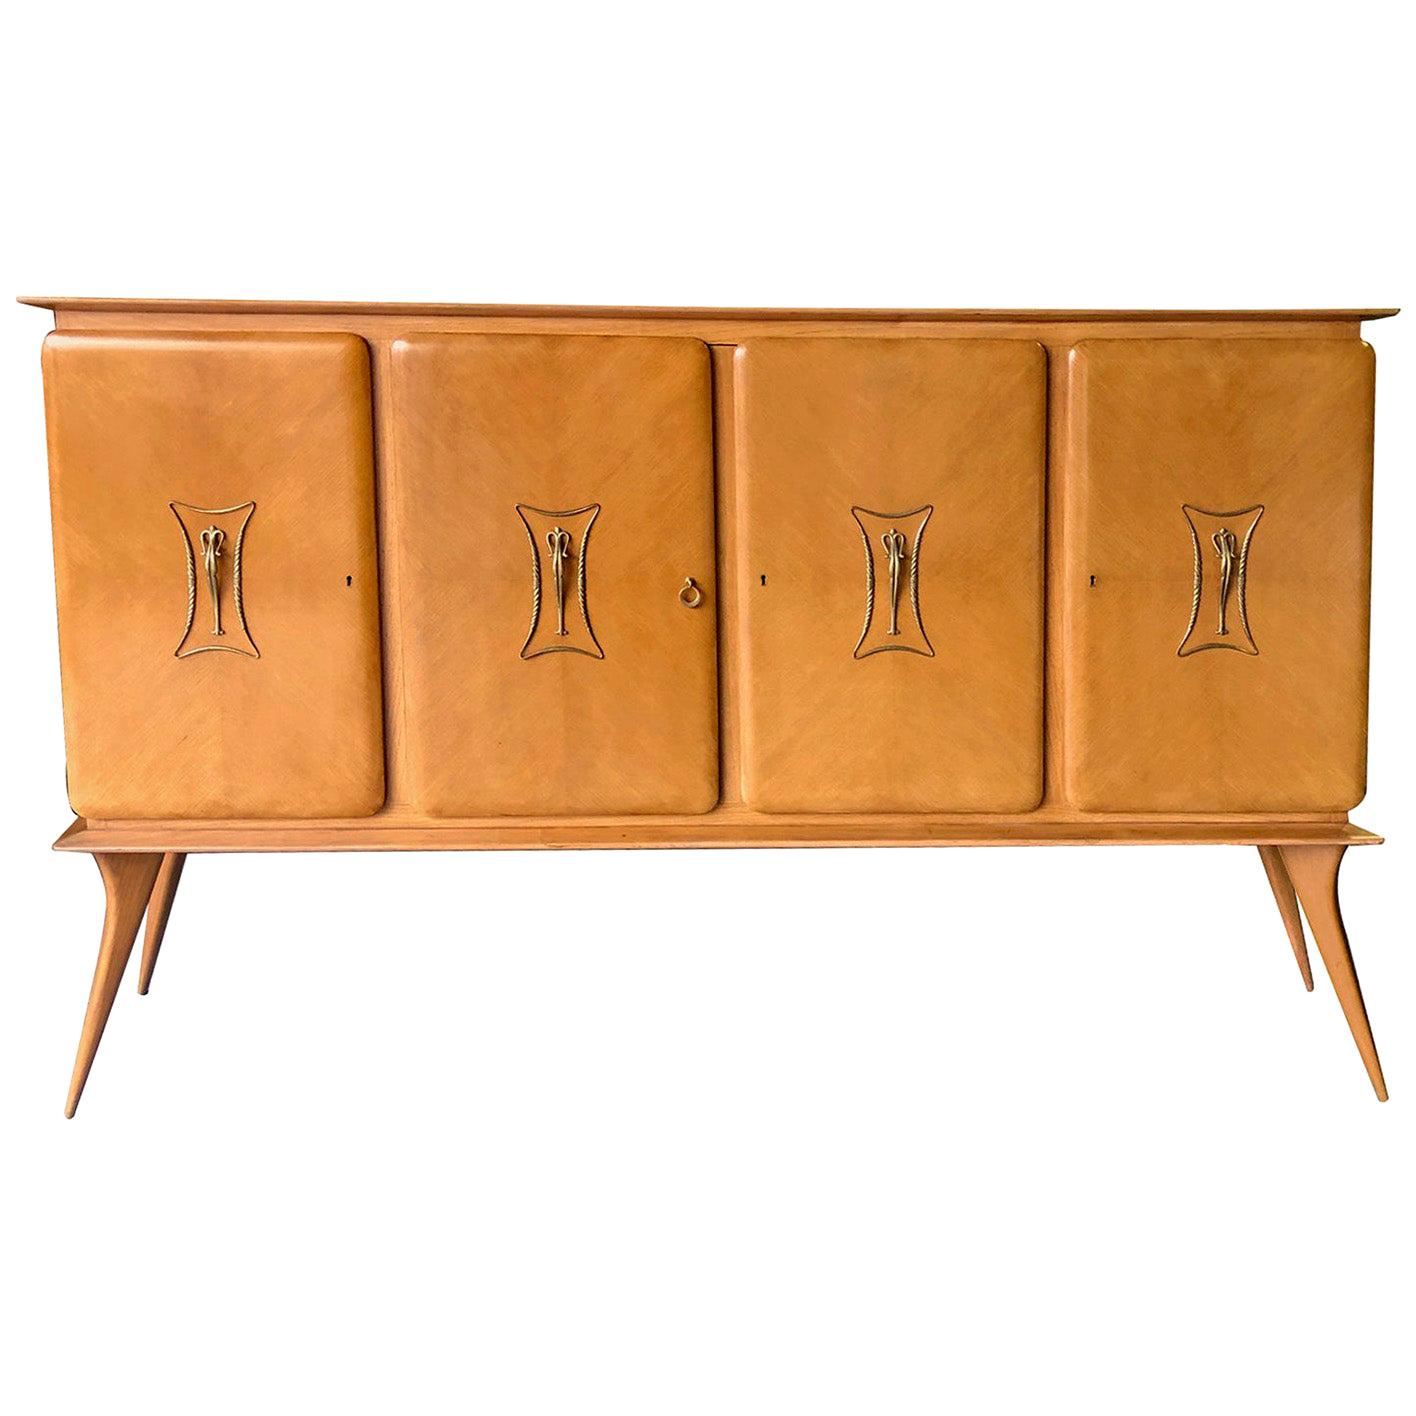 Stylish Italian Midcentury 4-Door Sycamore Credenza in the Style of Ico Parisi For Sale